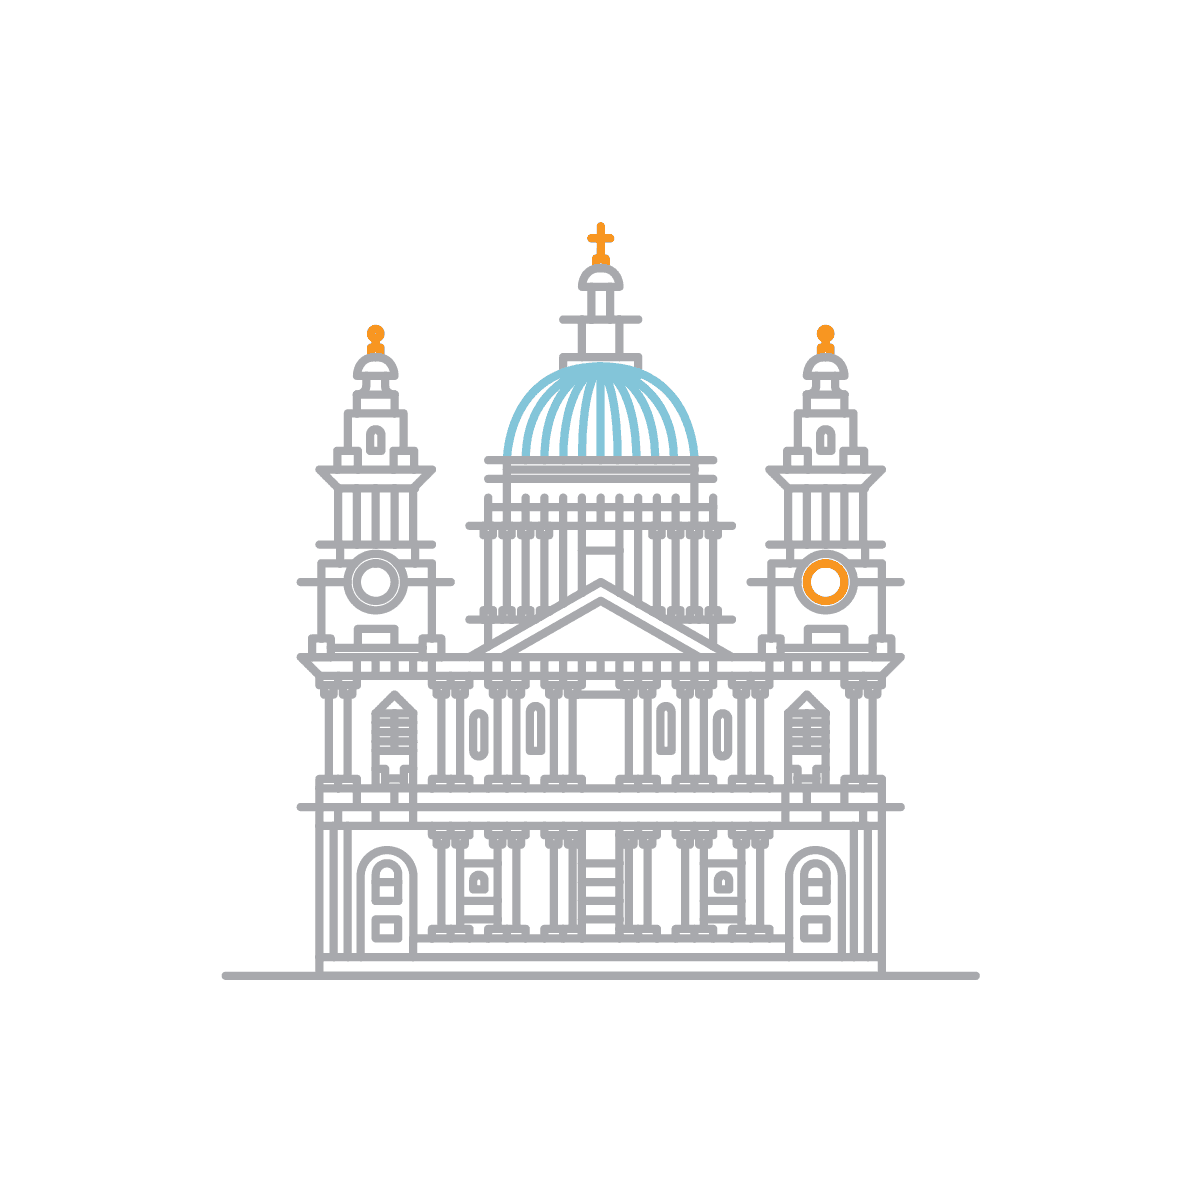 #068 - StPaulCathedral